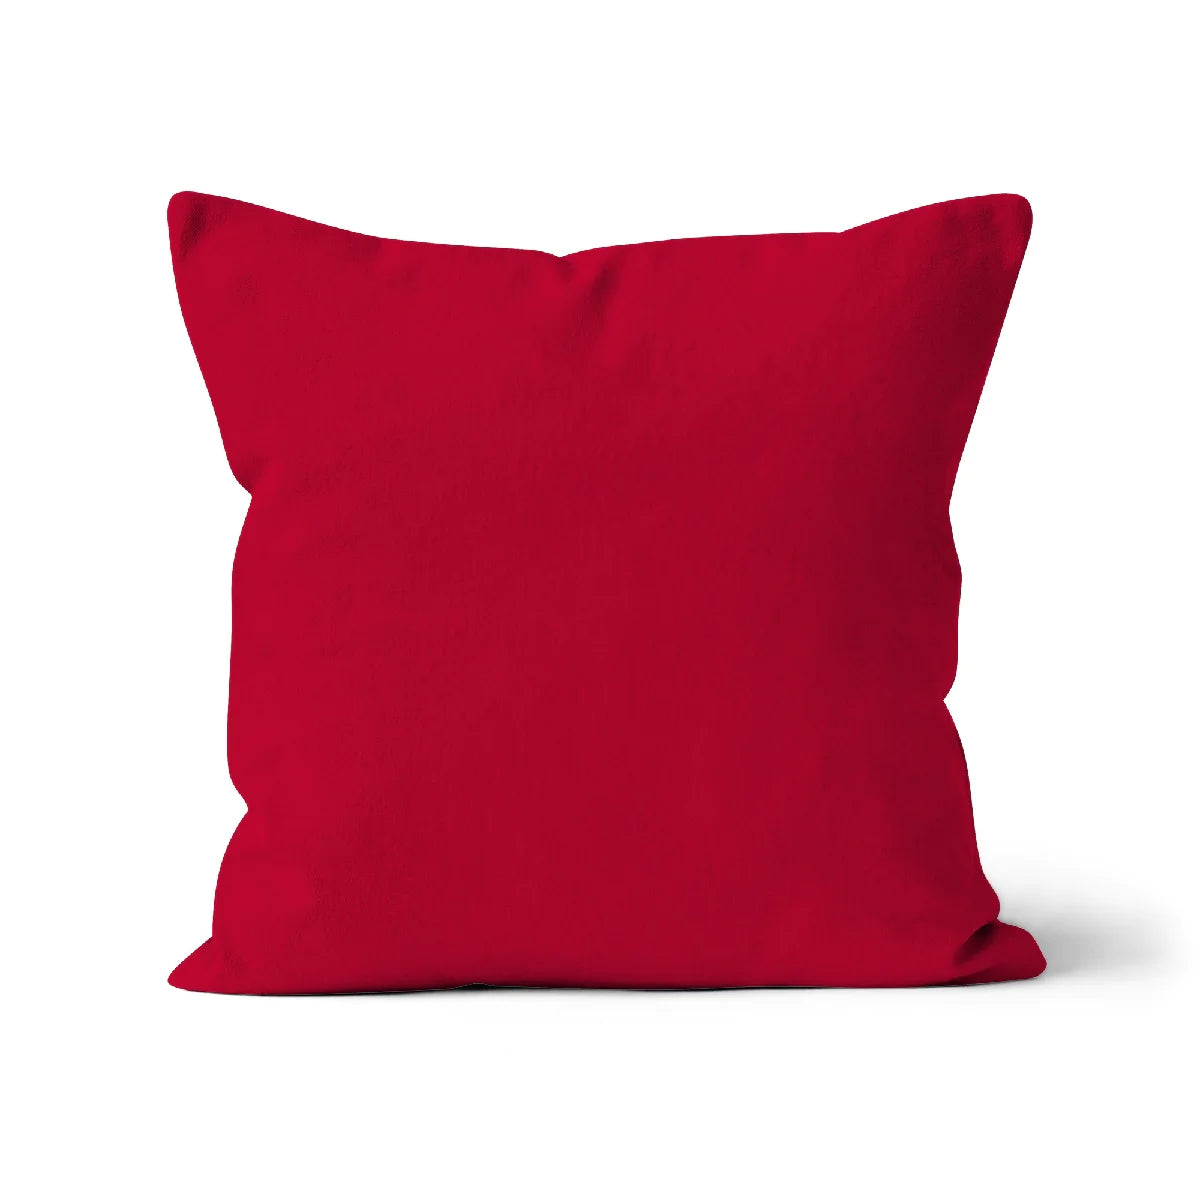 luxury red cushion cover, 100% organic cotton bright red cushion cover, square cushion cover, red cushion cover 45x45cm.